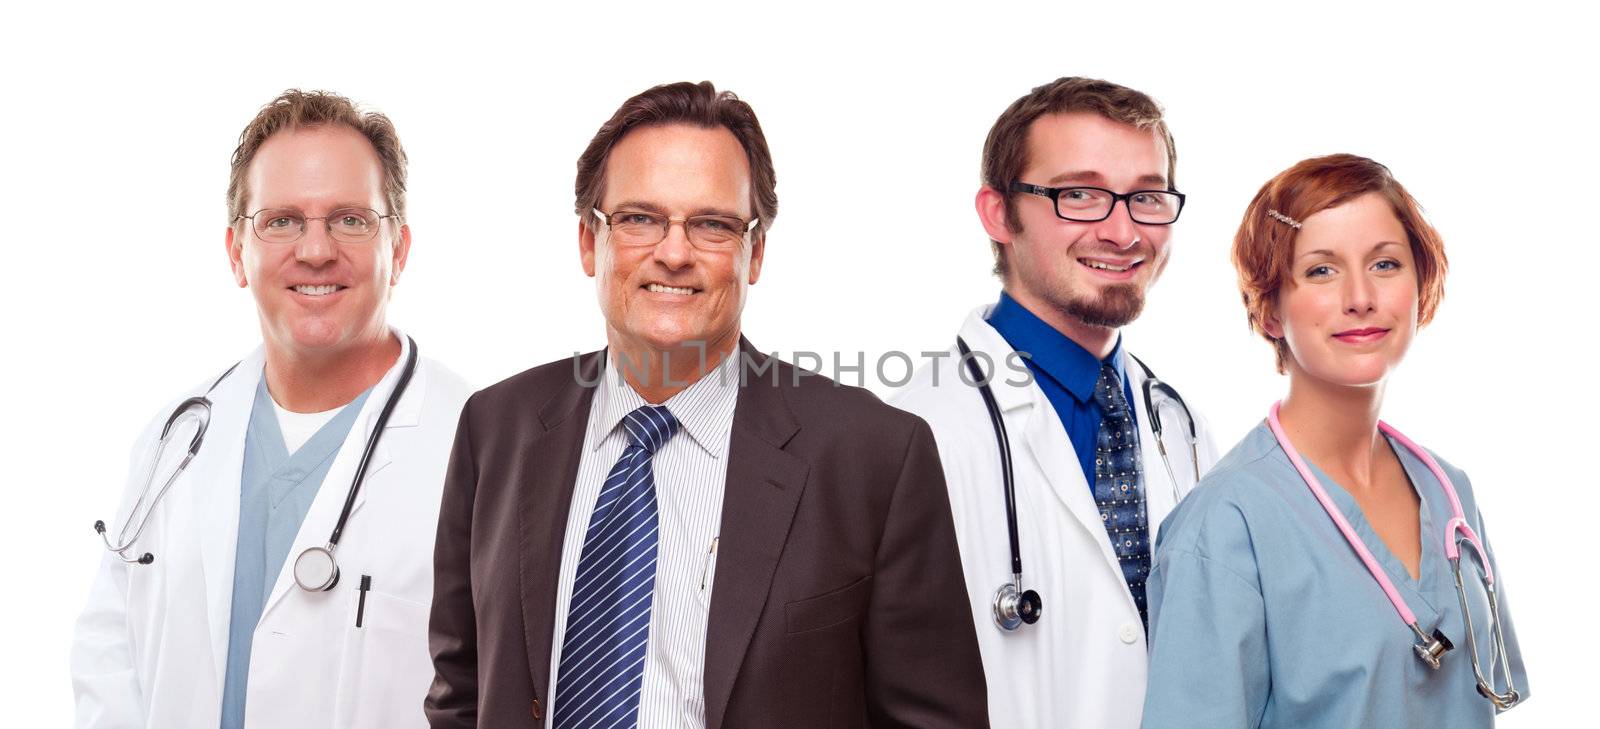 Smiling Businessman with Male and Female Doctors or Nurses Isolated on a White Background.